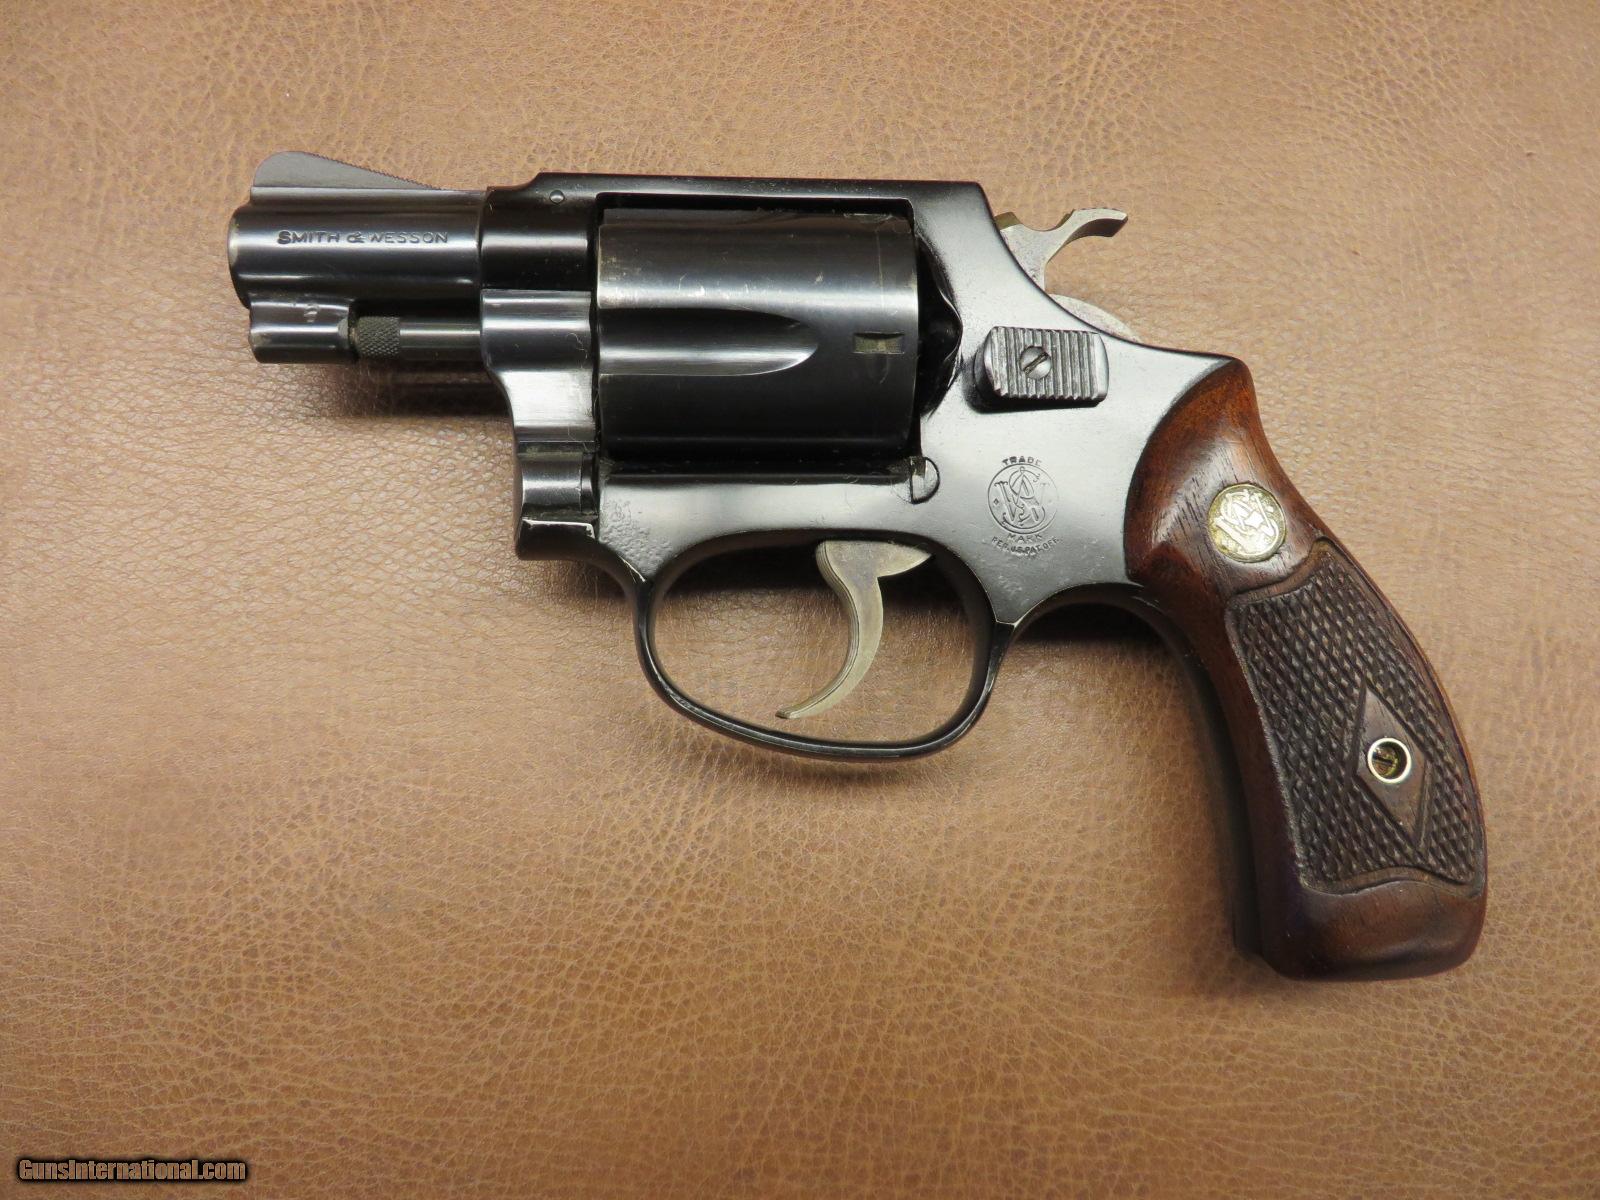 Smith and wesson 637 airweight